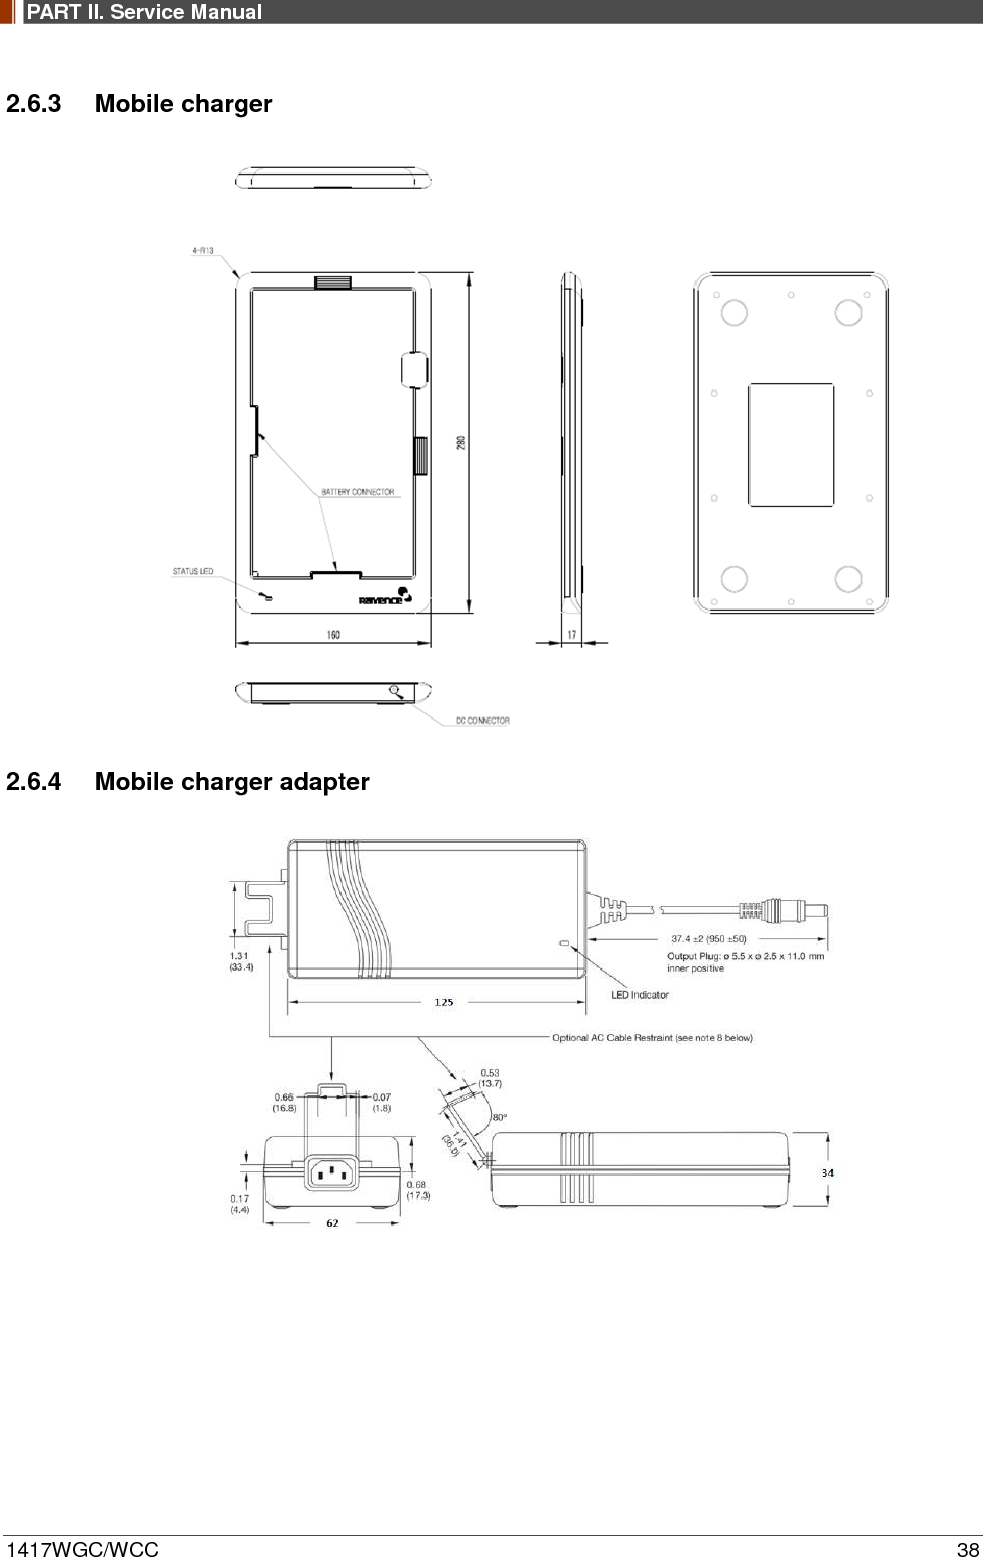 PART II. Service Manual  1417WGC/WCC 38 2.6.3 Mobile charger  2.6.4 Mobile charger adapter  